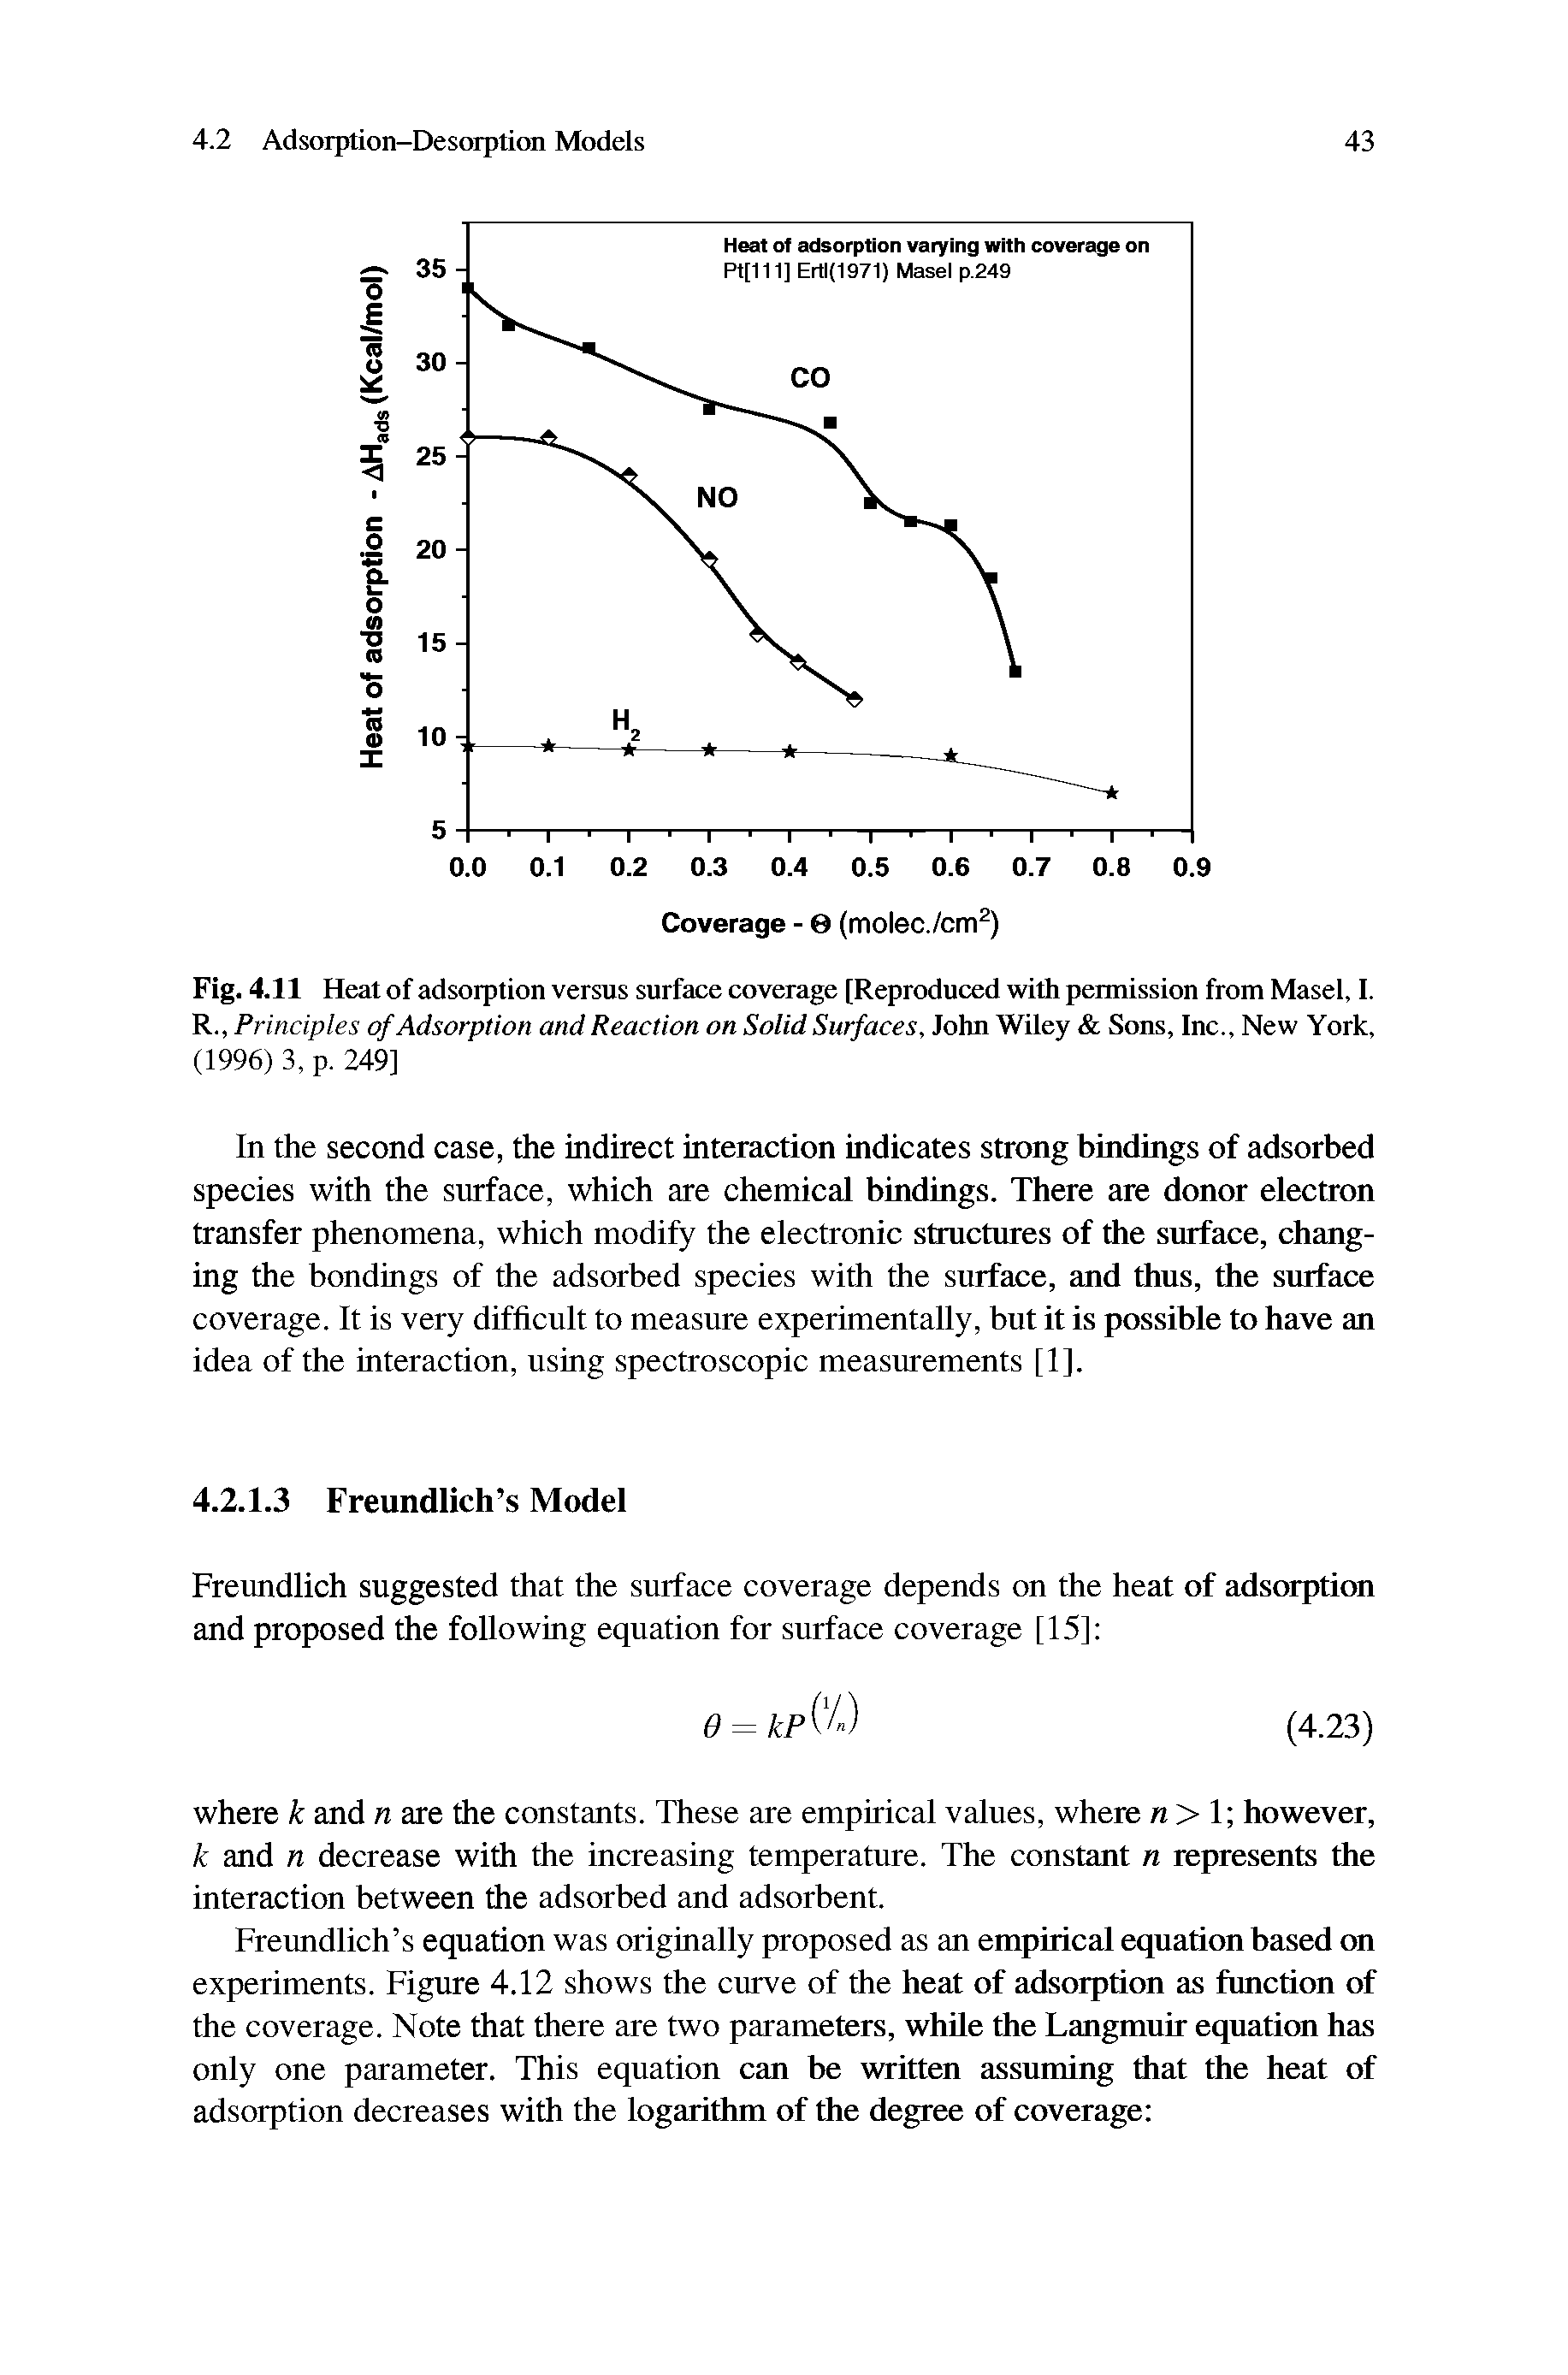 Fig. 4.11 Heat of adsorption versus surface coverage [Reproduced with permission from Masel, I. R., Principles of Adsorption and Reaction on Solid Surfaces, John Wiley Sons, Inc., New York, (1996) 3, p. 249]...